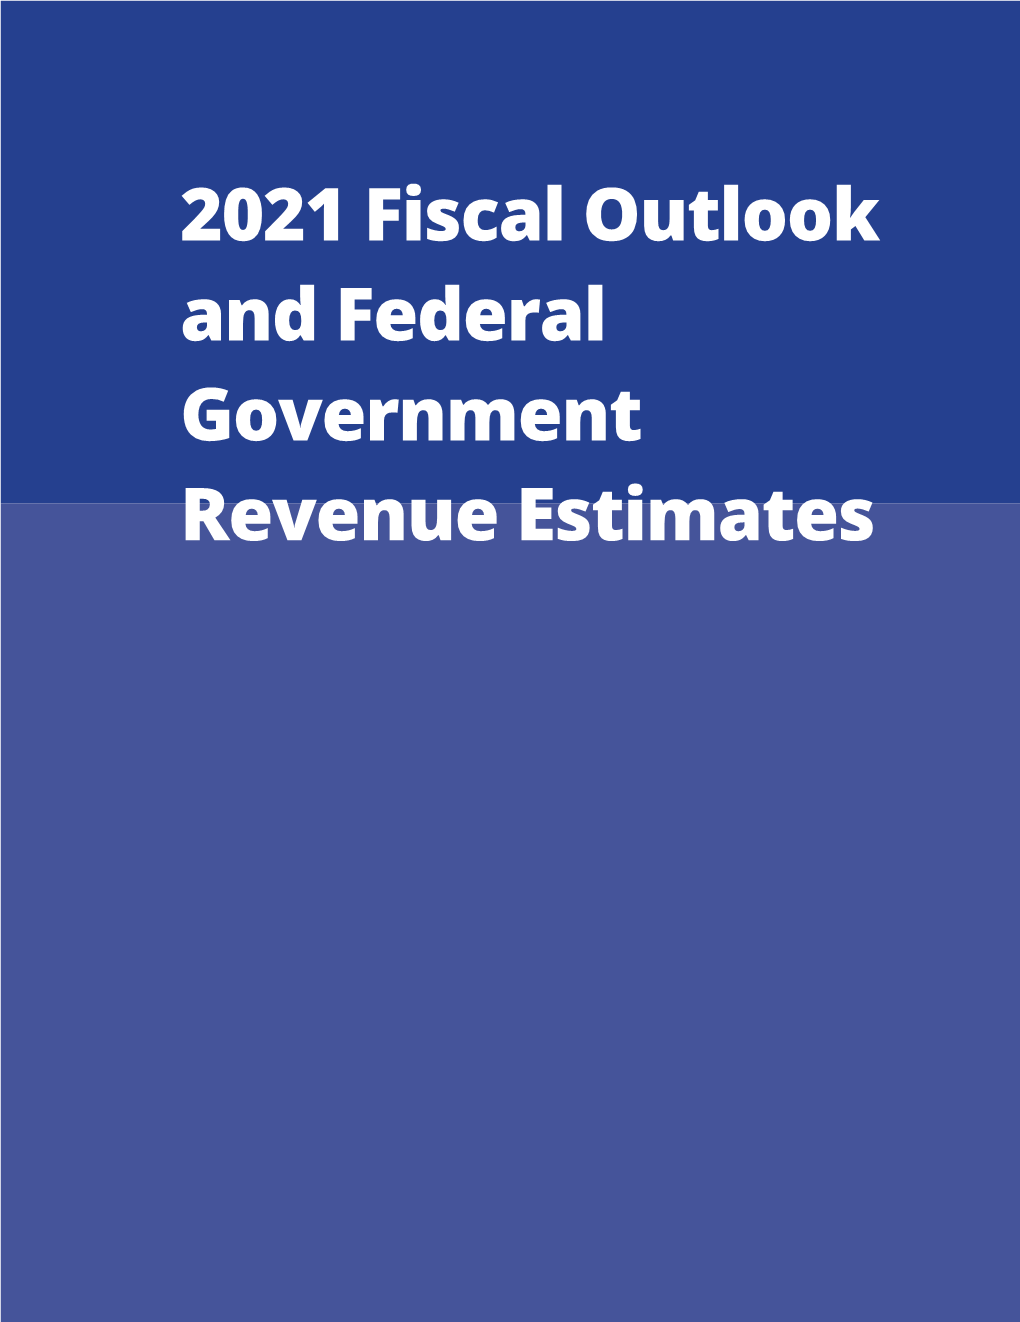 2021 Fiscal Outlook and Federal Government Revenue Estimates